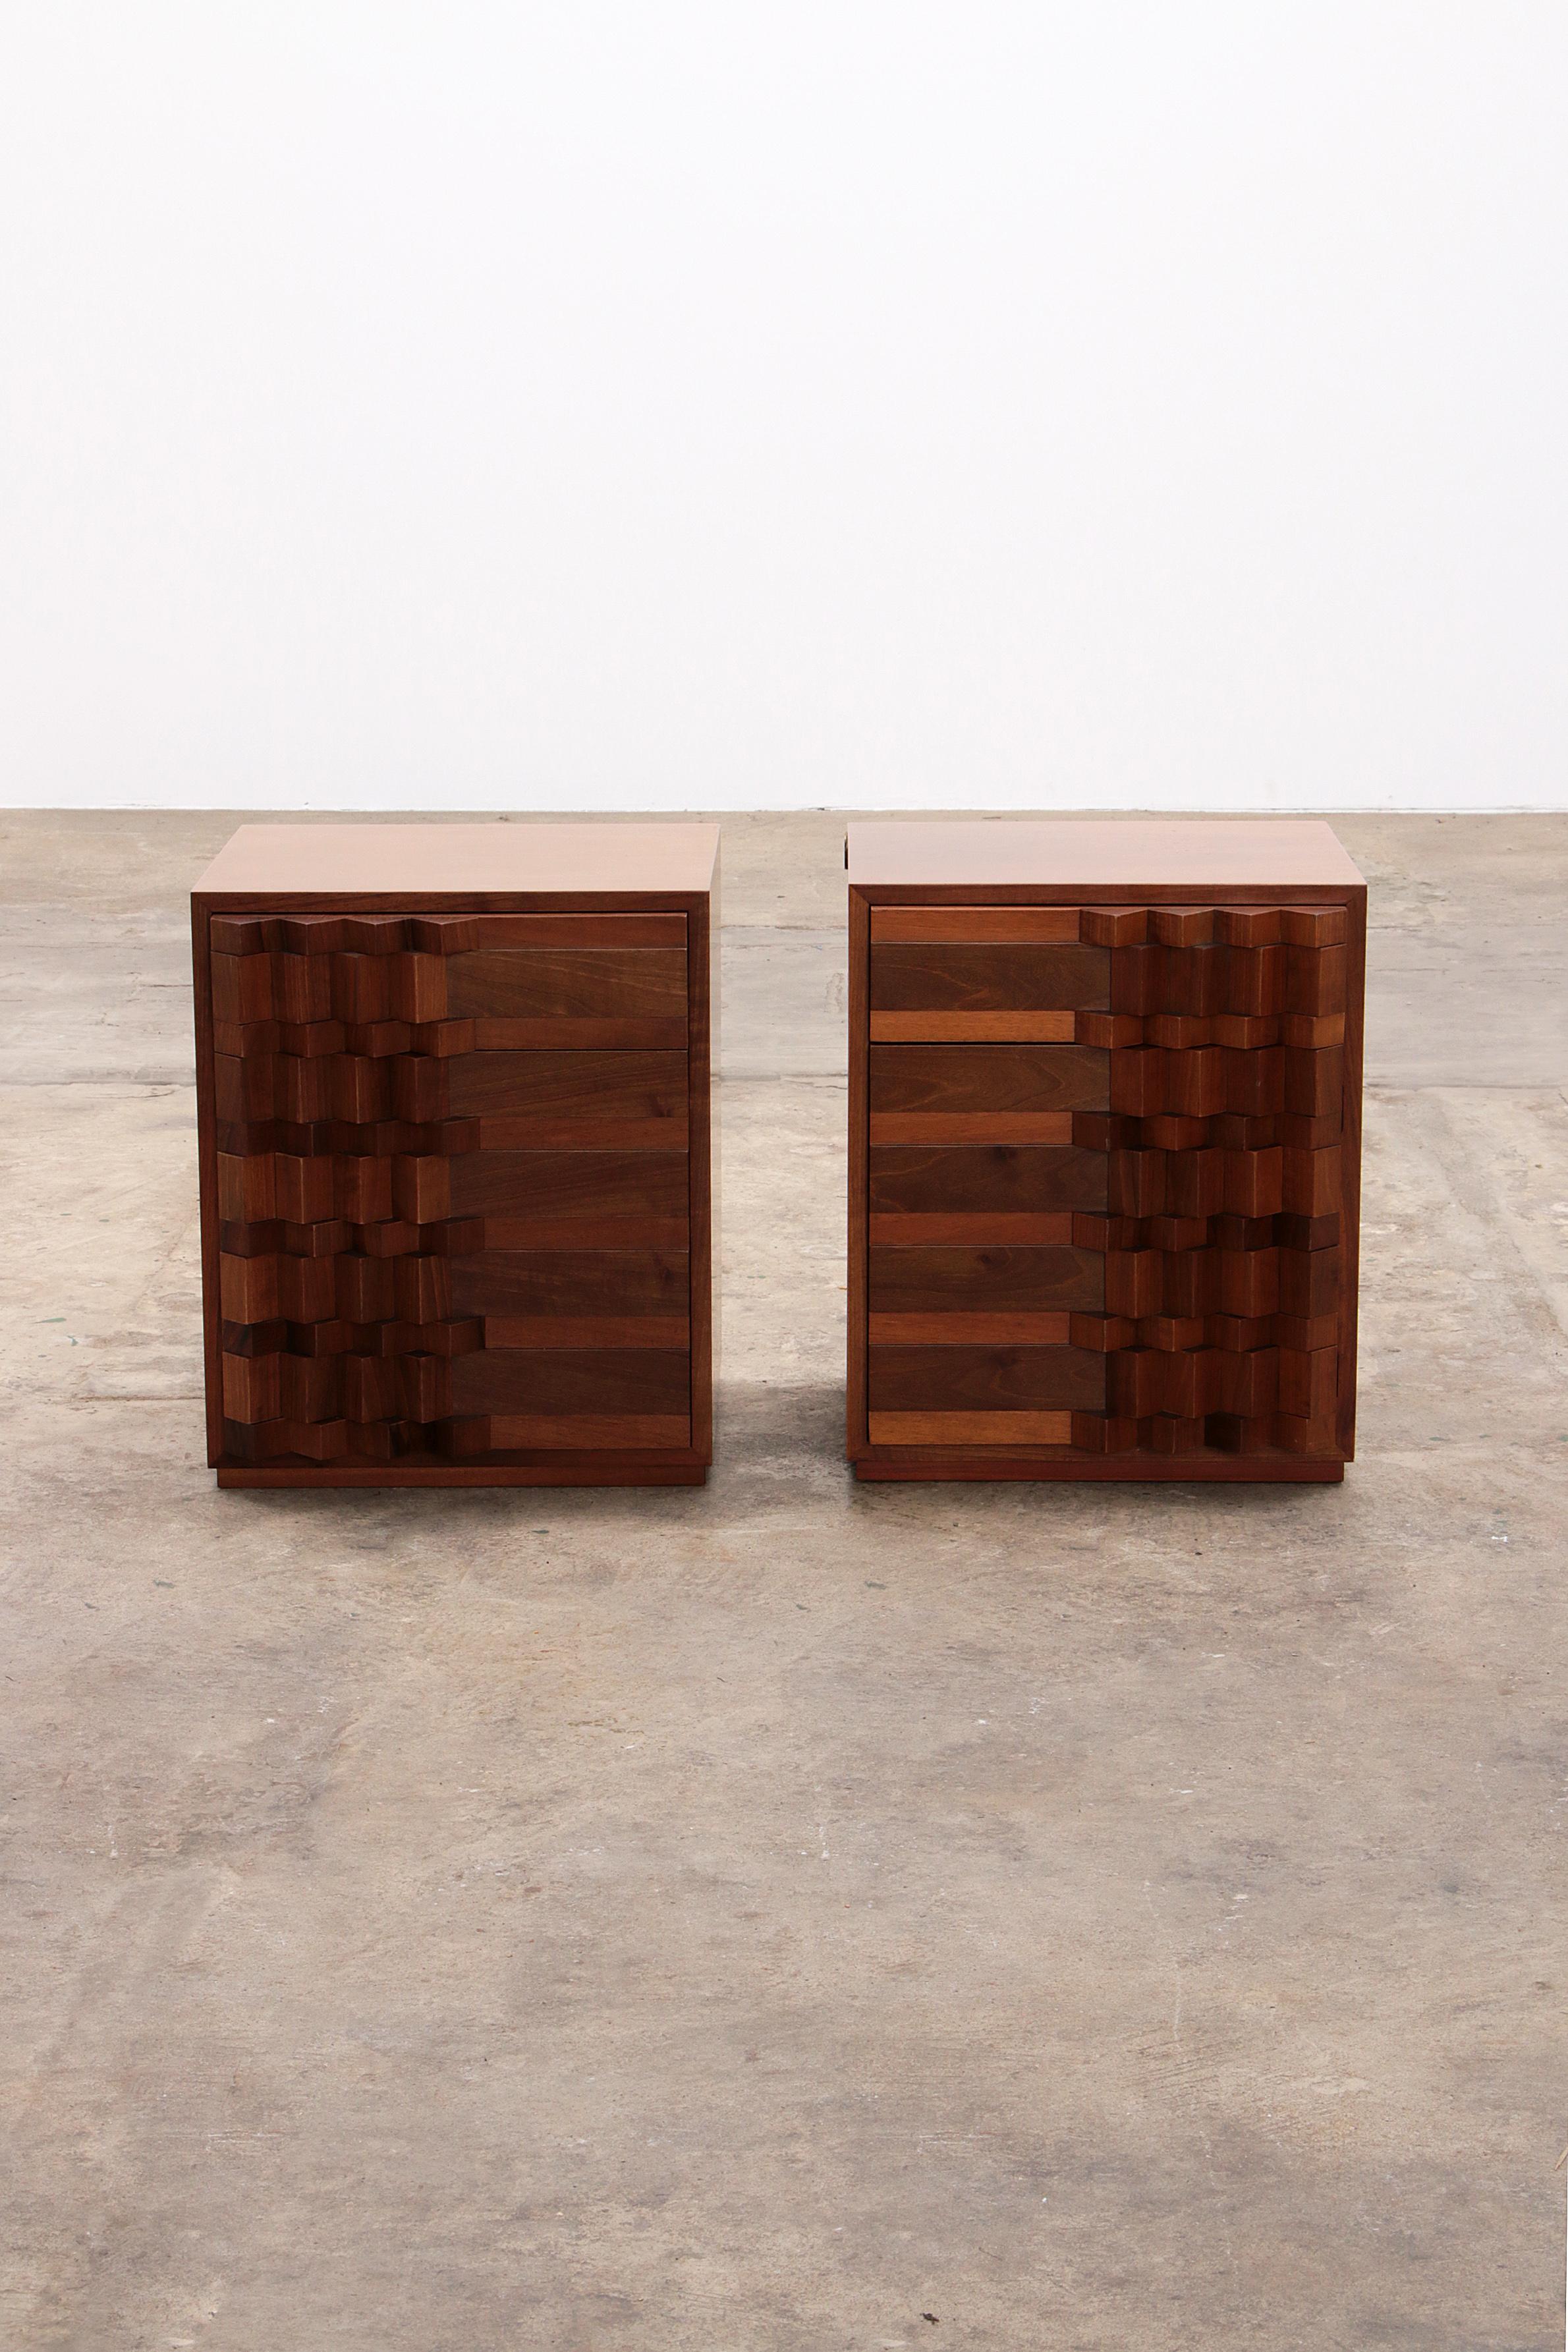 uciano Frigerio  bedside tables  1970

Beautiful pair of bedside tables with graphic doors designed and manufactured by Luciano Frigerio, Italy 1970. These bedside tables are made of brown glossy lacquered wood. The graphic doors are composed of